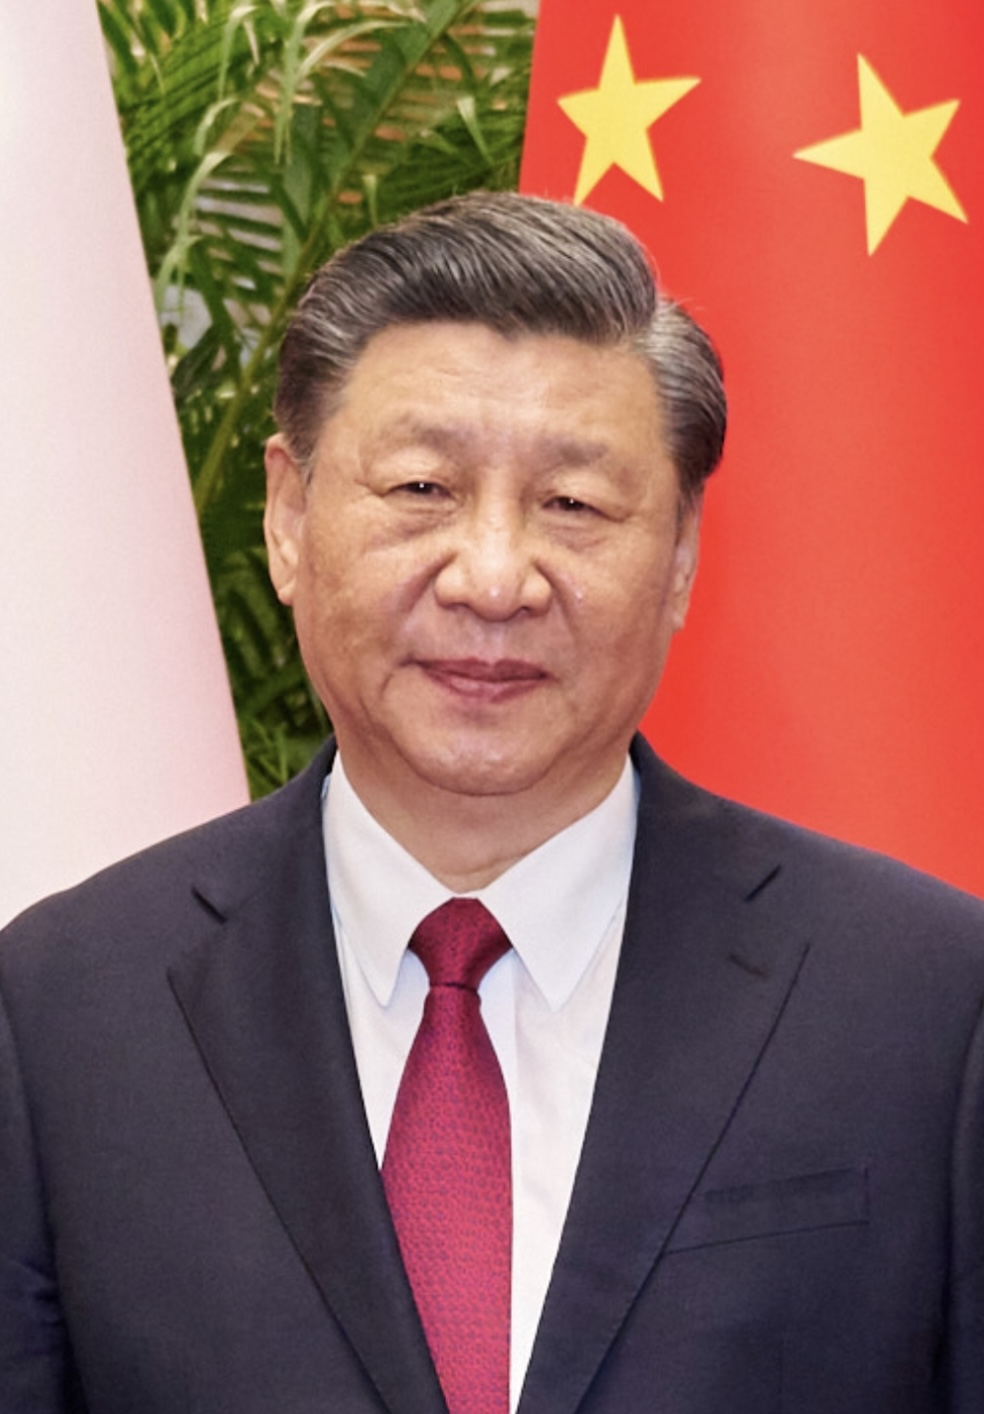 Xi’s House of Cards Collapses: $6 Trillion Wipeout Exposes Fragile Growth